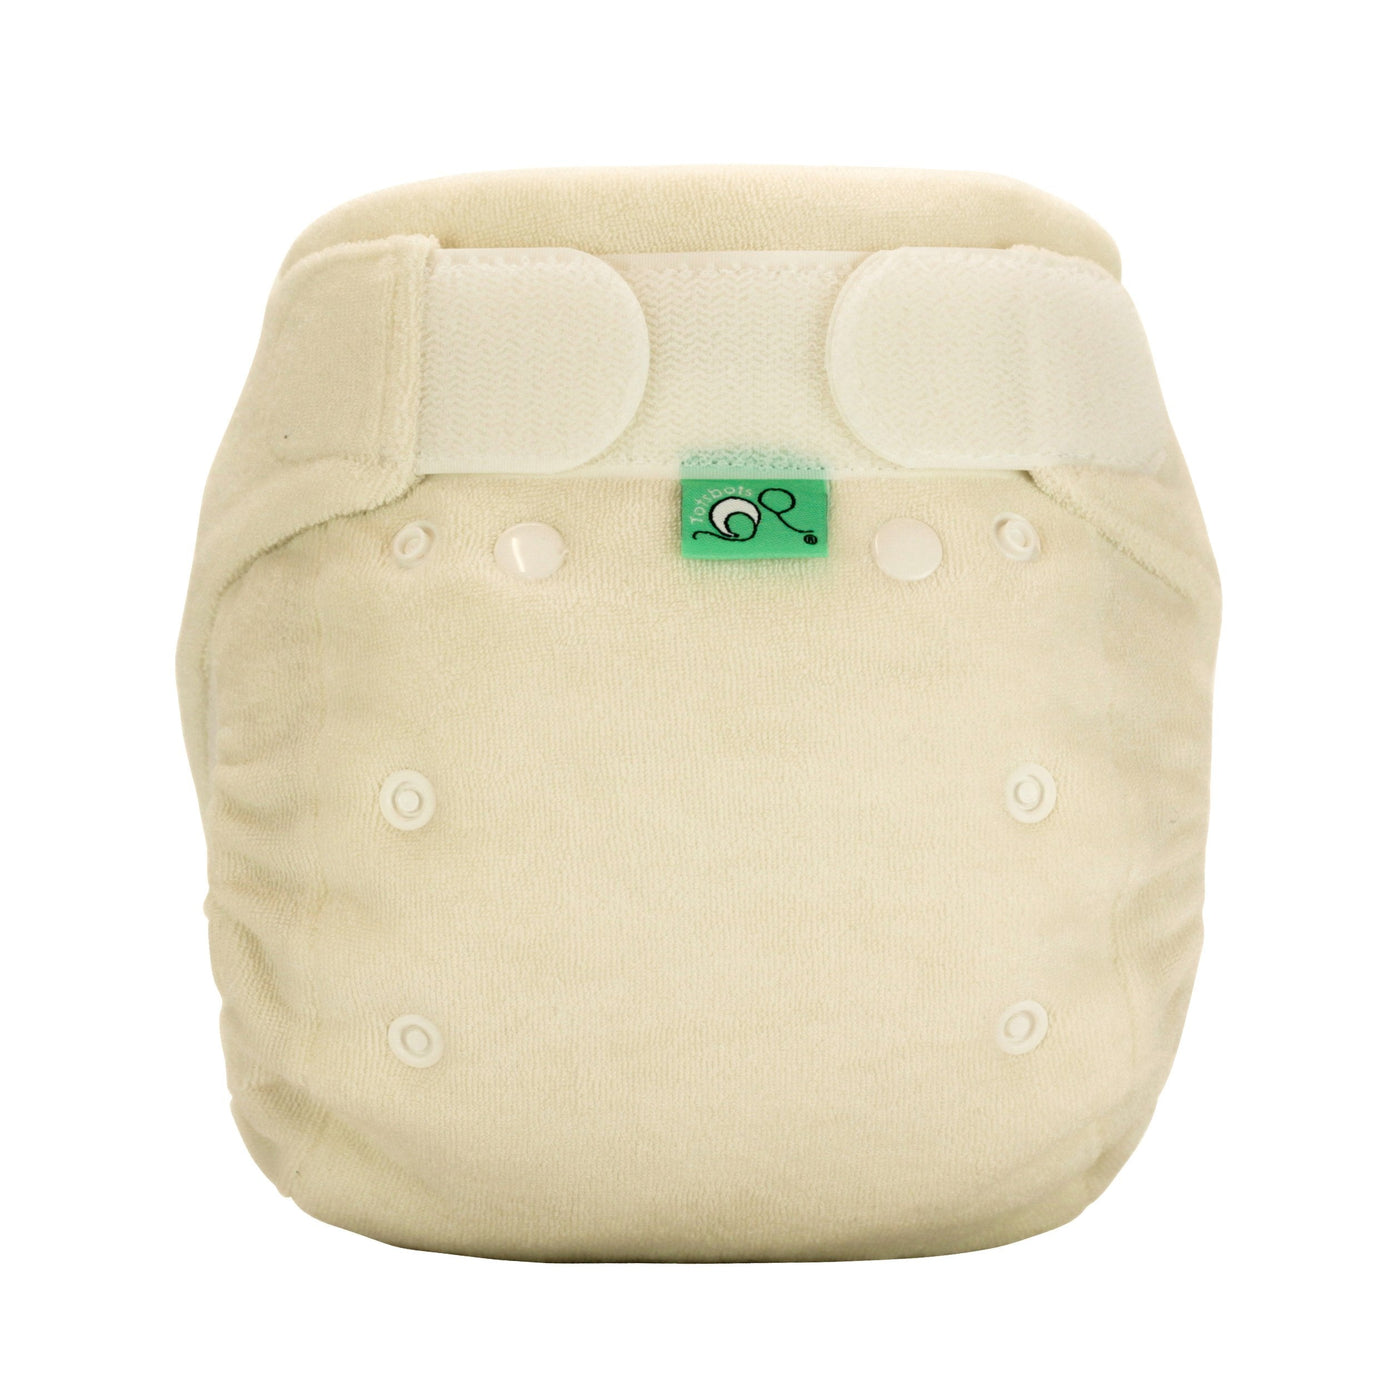 Tots BotsBamboozle Stretch NappyColour: NaturalSize: Size 1 (6-18lbs)reusable nappiesEarthlets